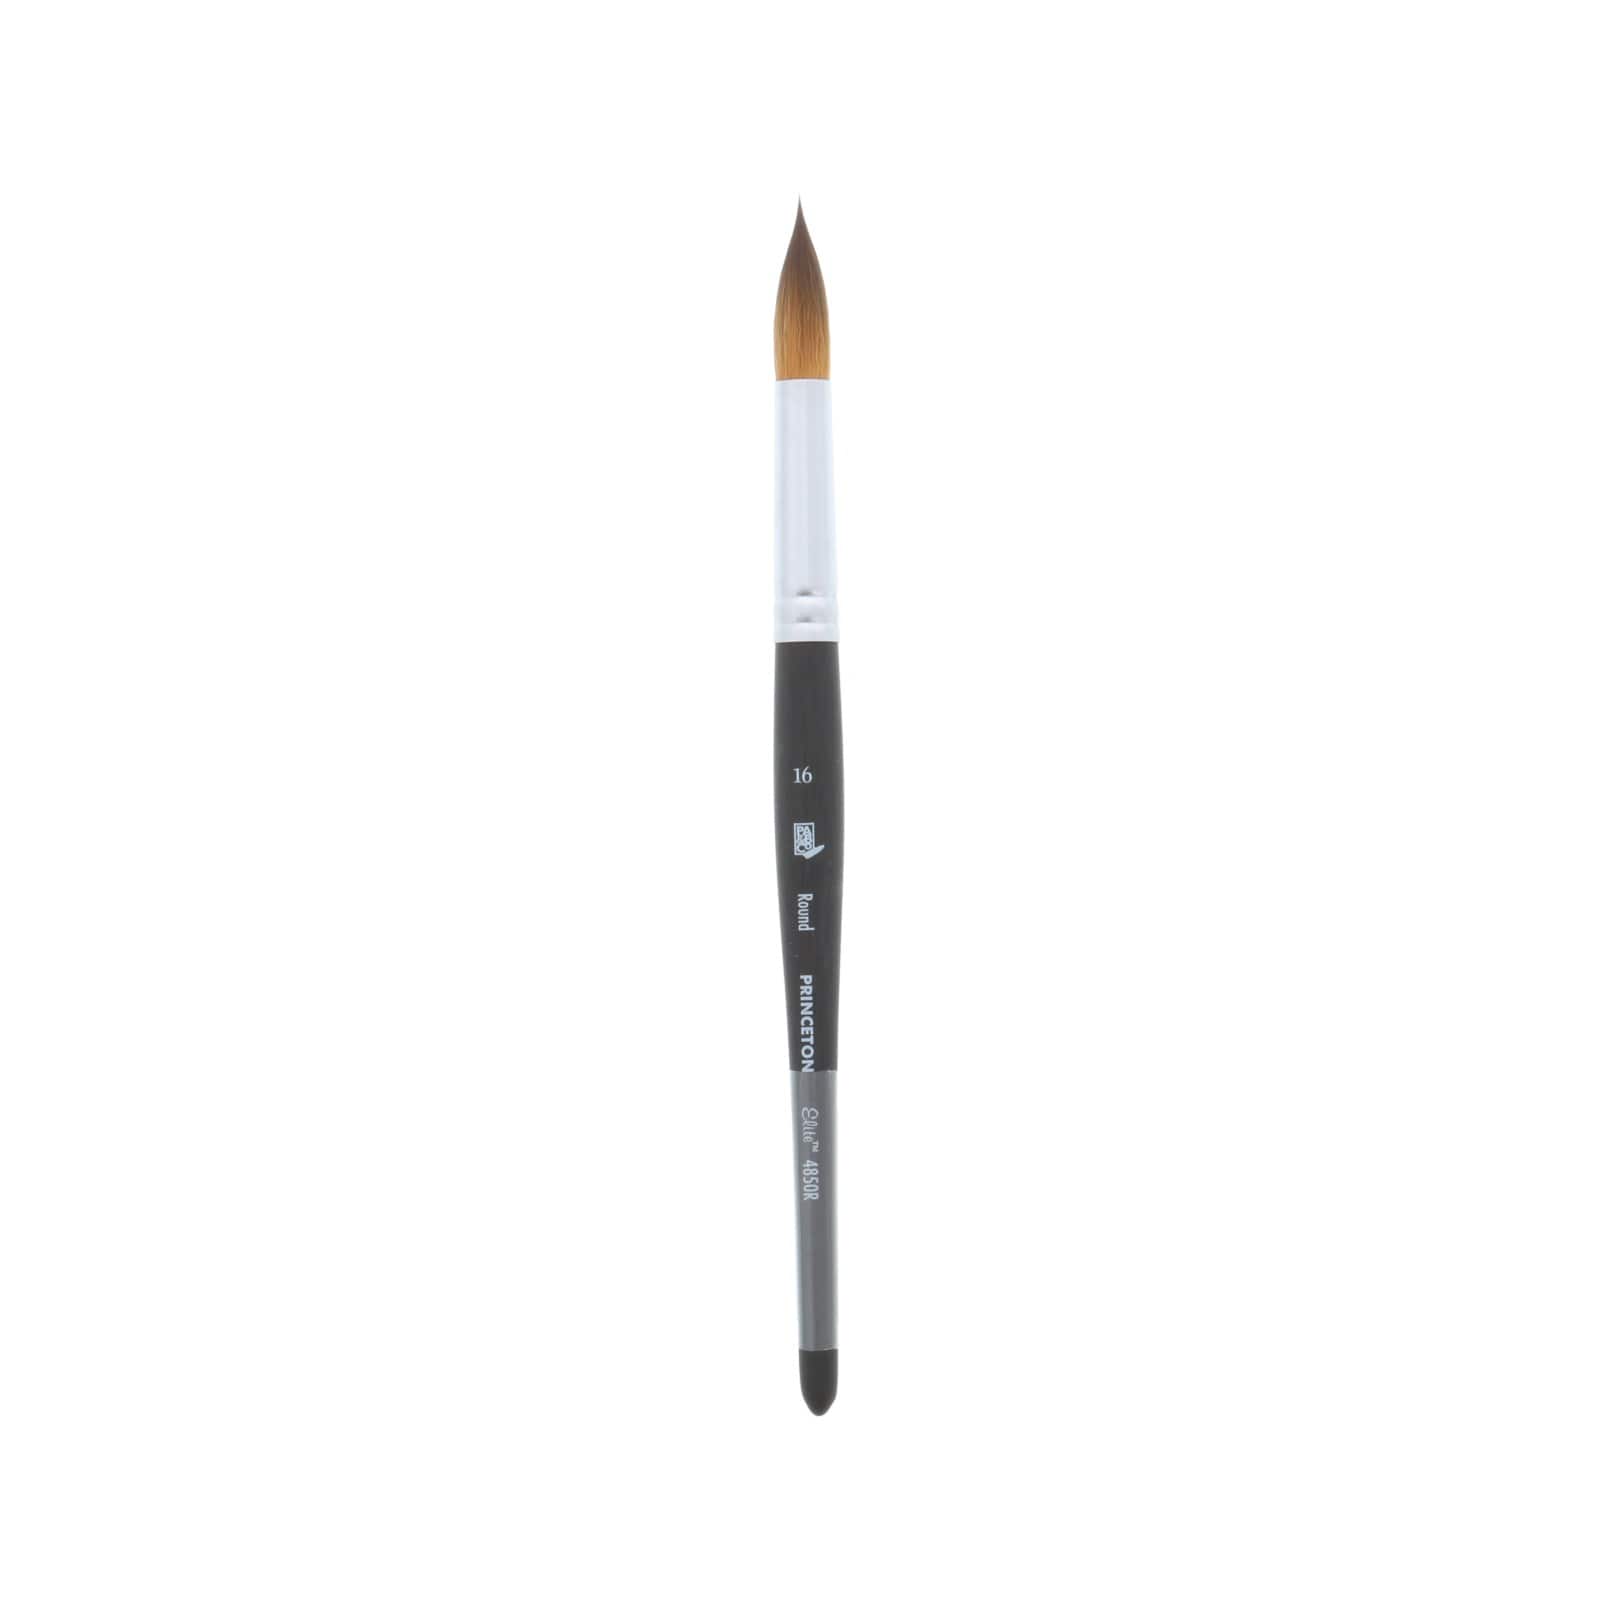 princeceton-aqua-elite-water-colour-brush-choose-your-size-and-shape-by-one